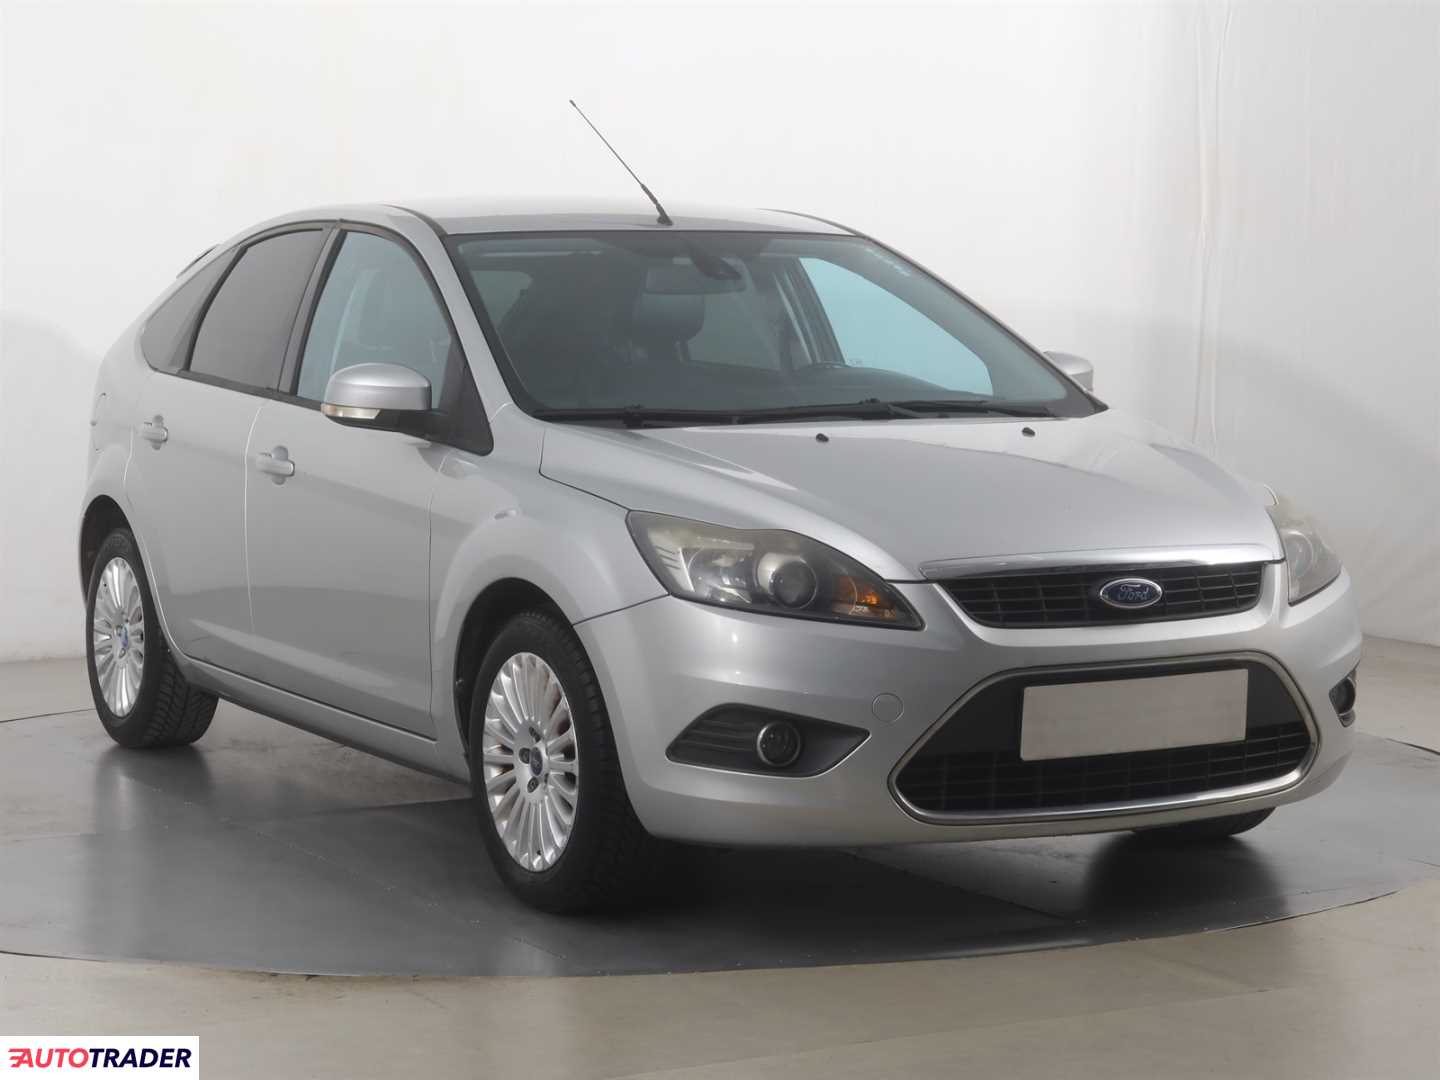 Ford Focus 2009 1.6 113 KM